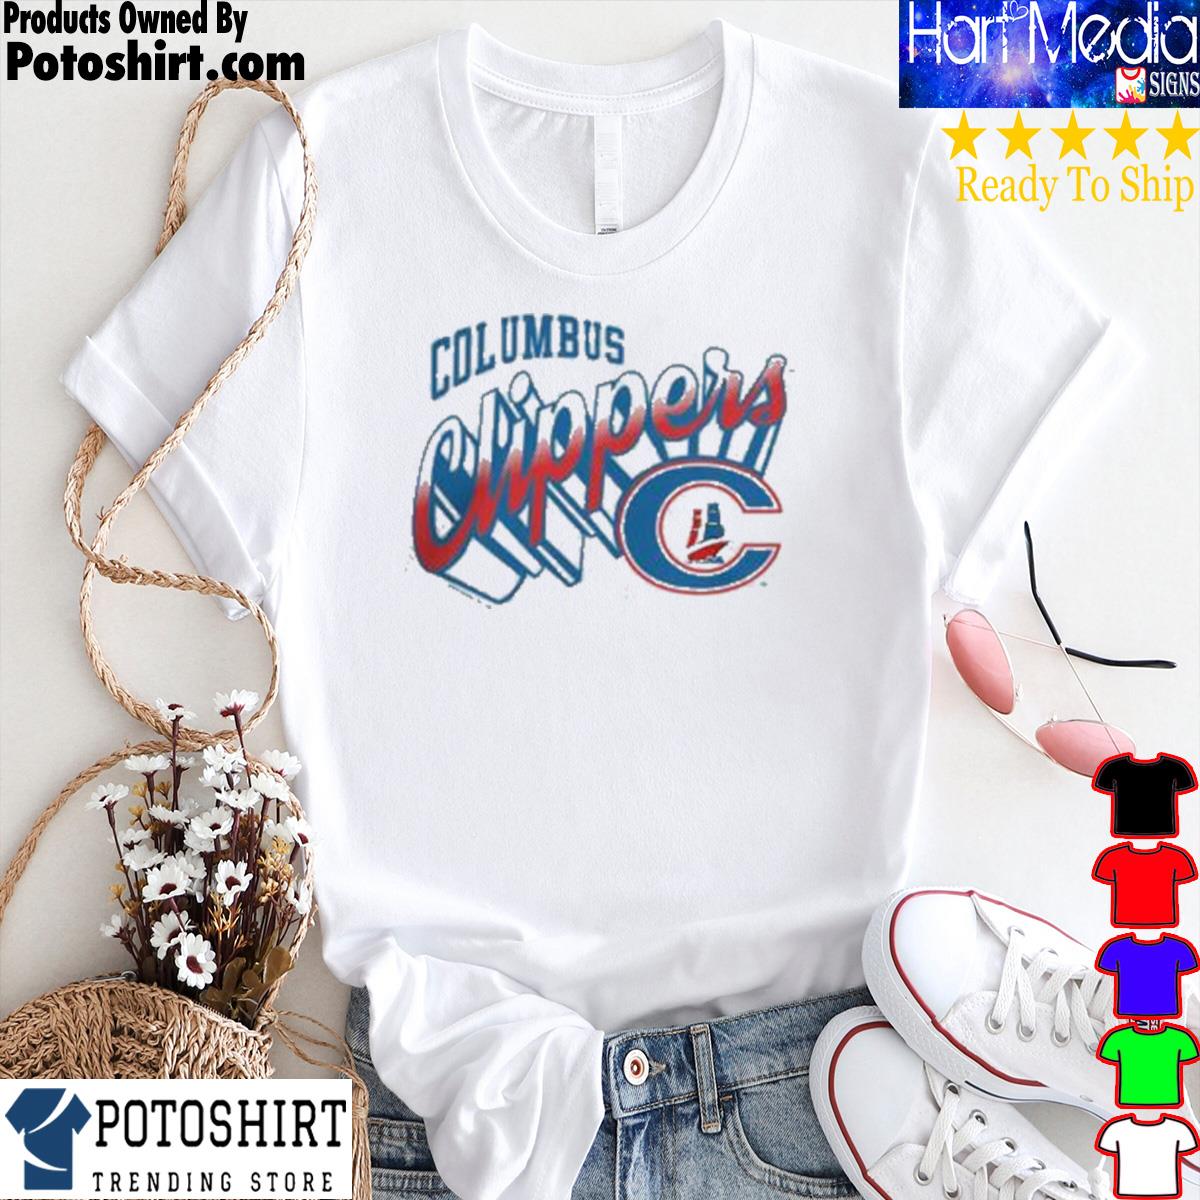 Clippers Apparel, Clippers Gear, Columbus Clippers Merch